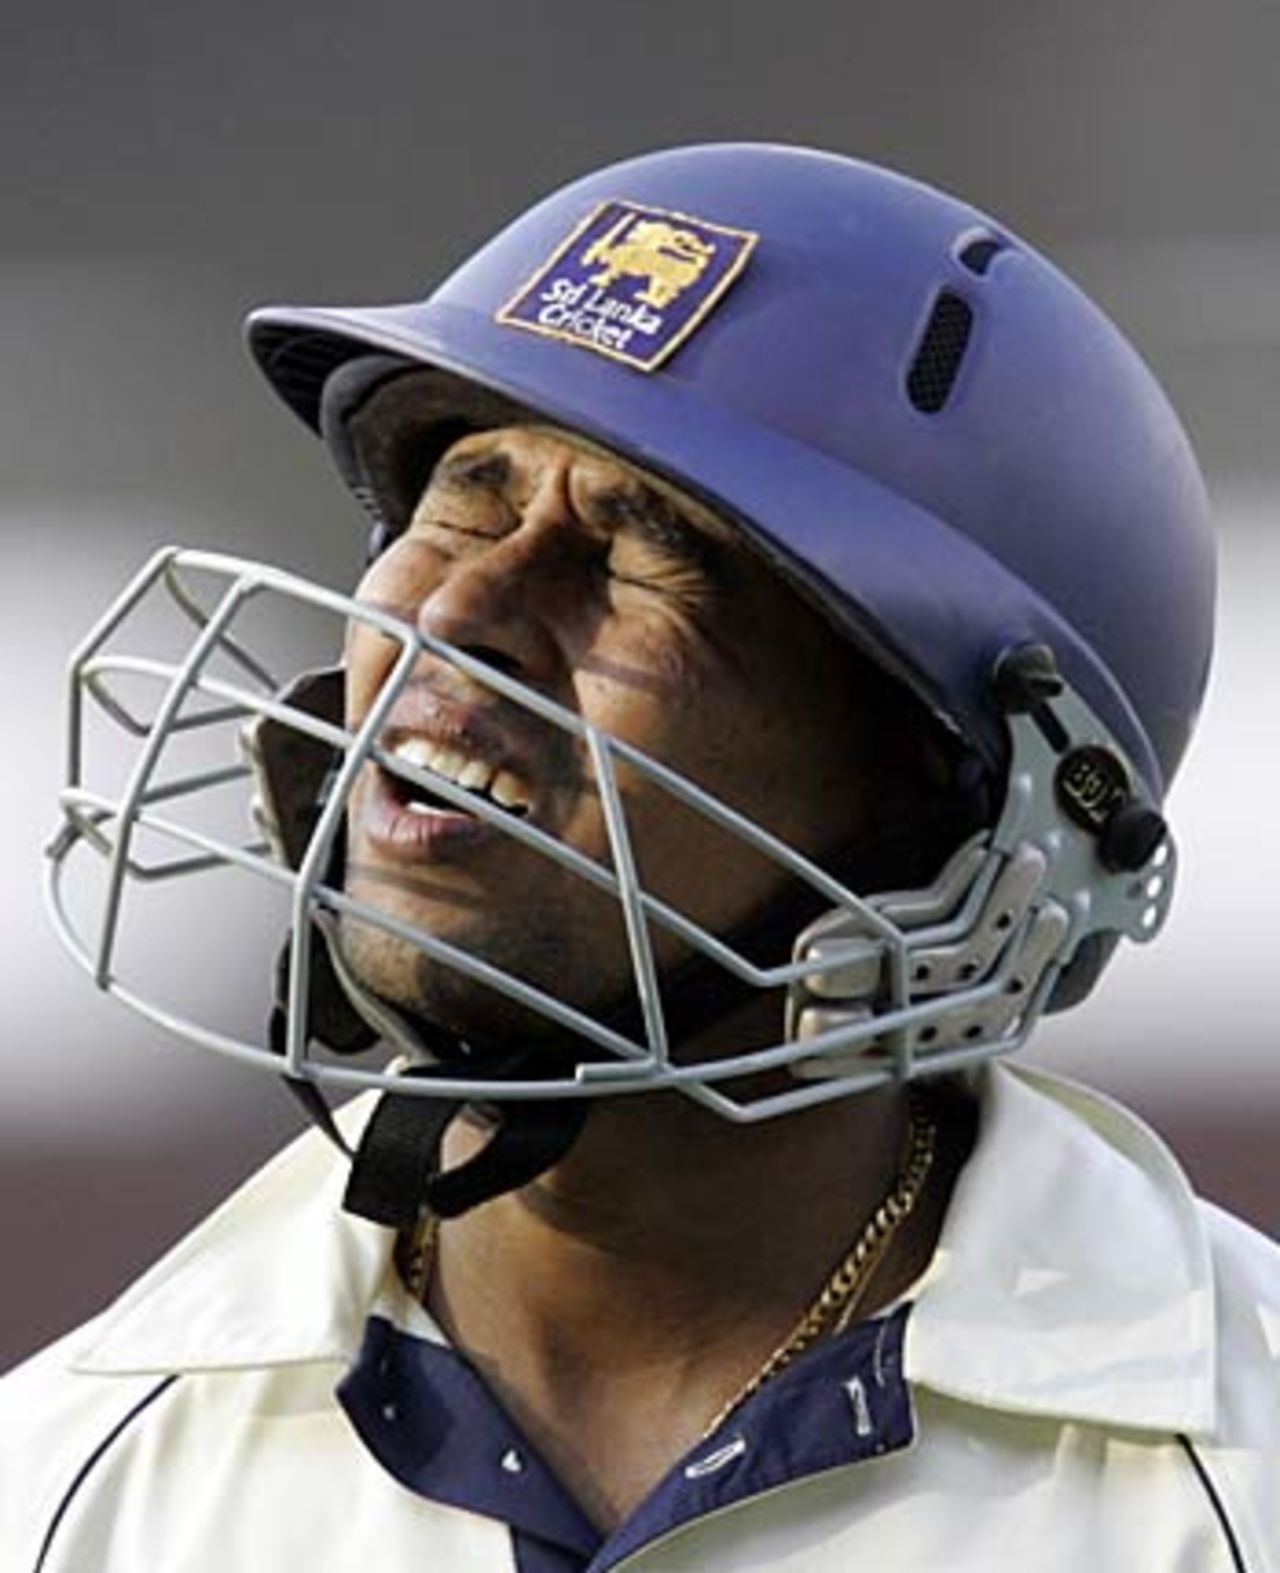 Tillakaratne Dilshan is distraught after getting out for 65, India v Sri Lanka, 3rd Test, Ahmedabad, 4th day, December 21, 2005